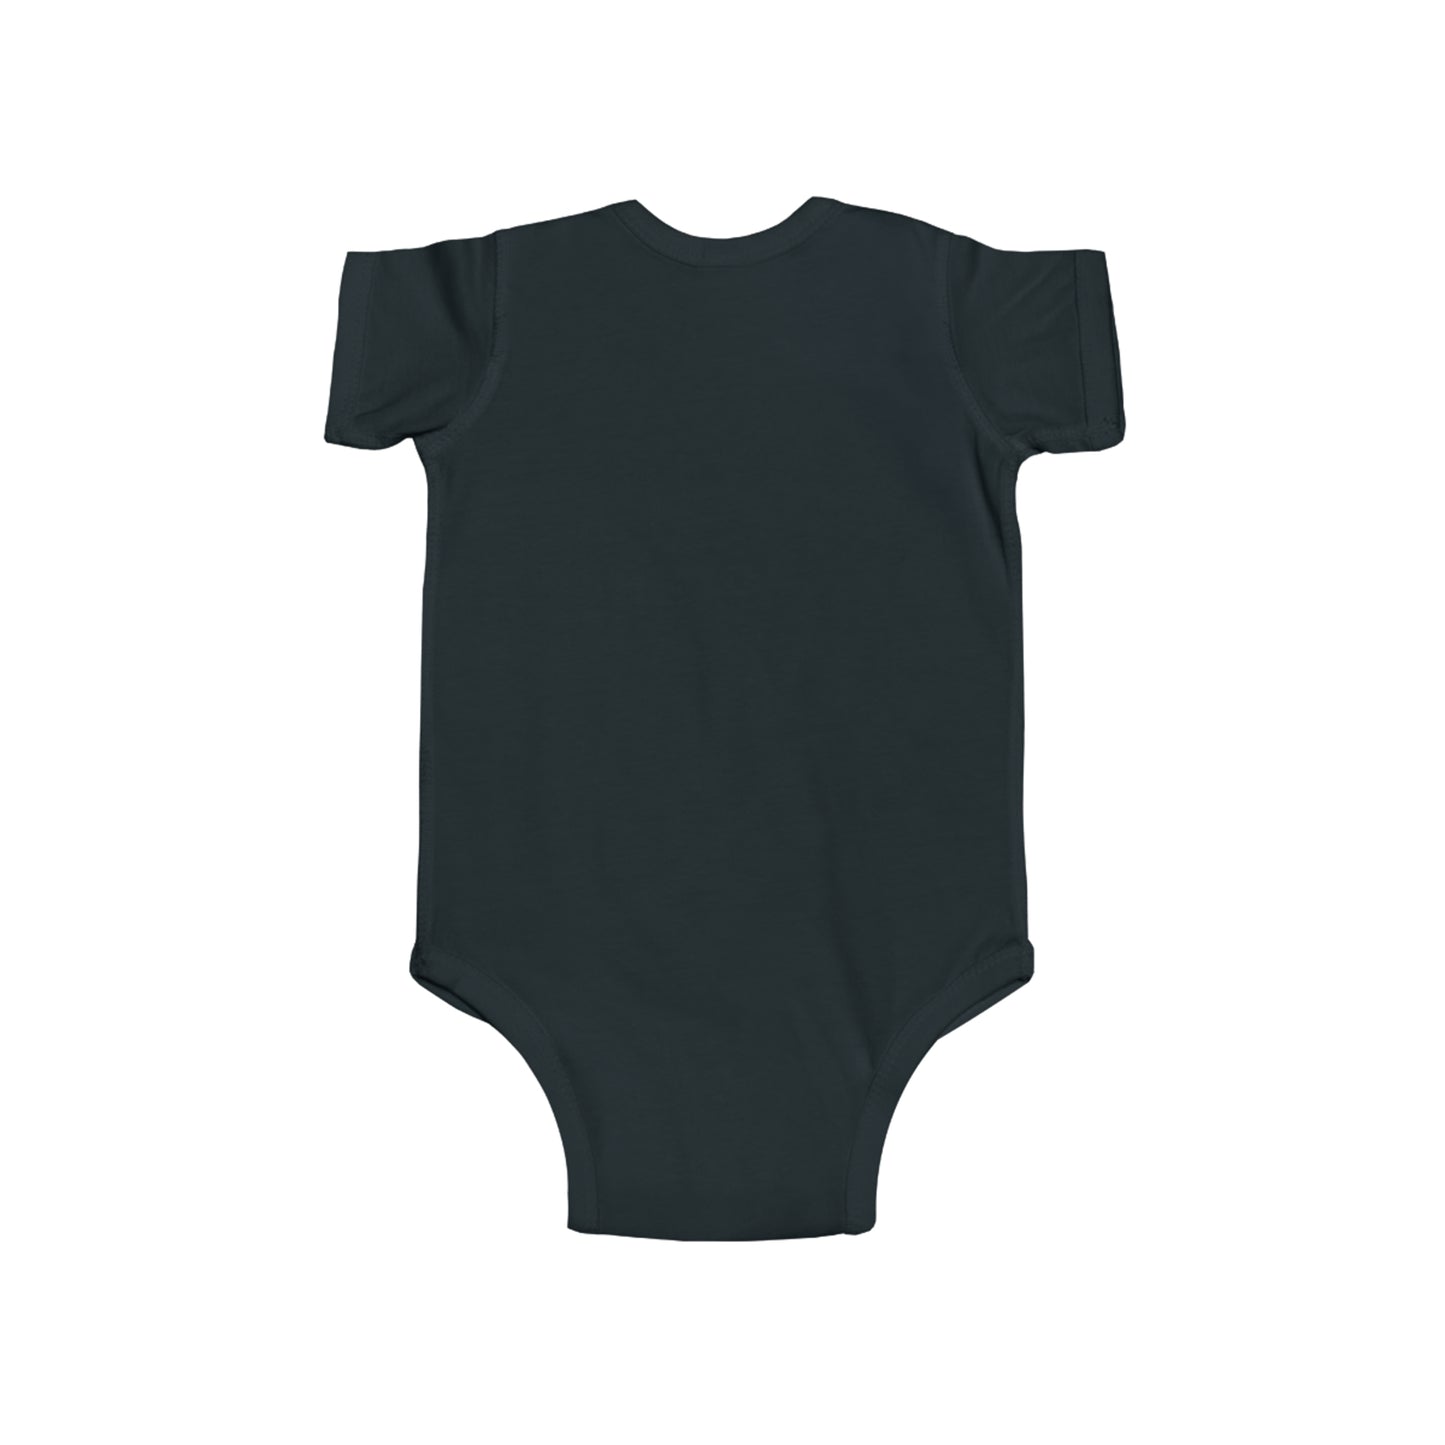 "Baby It's Cold Outside" Infant Fine Jersey Bodysuit, Soft and Durable, Plastic Snaps at the Cross Closure for Easy Changing Access